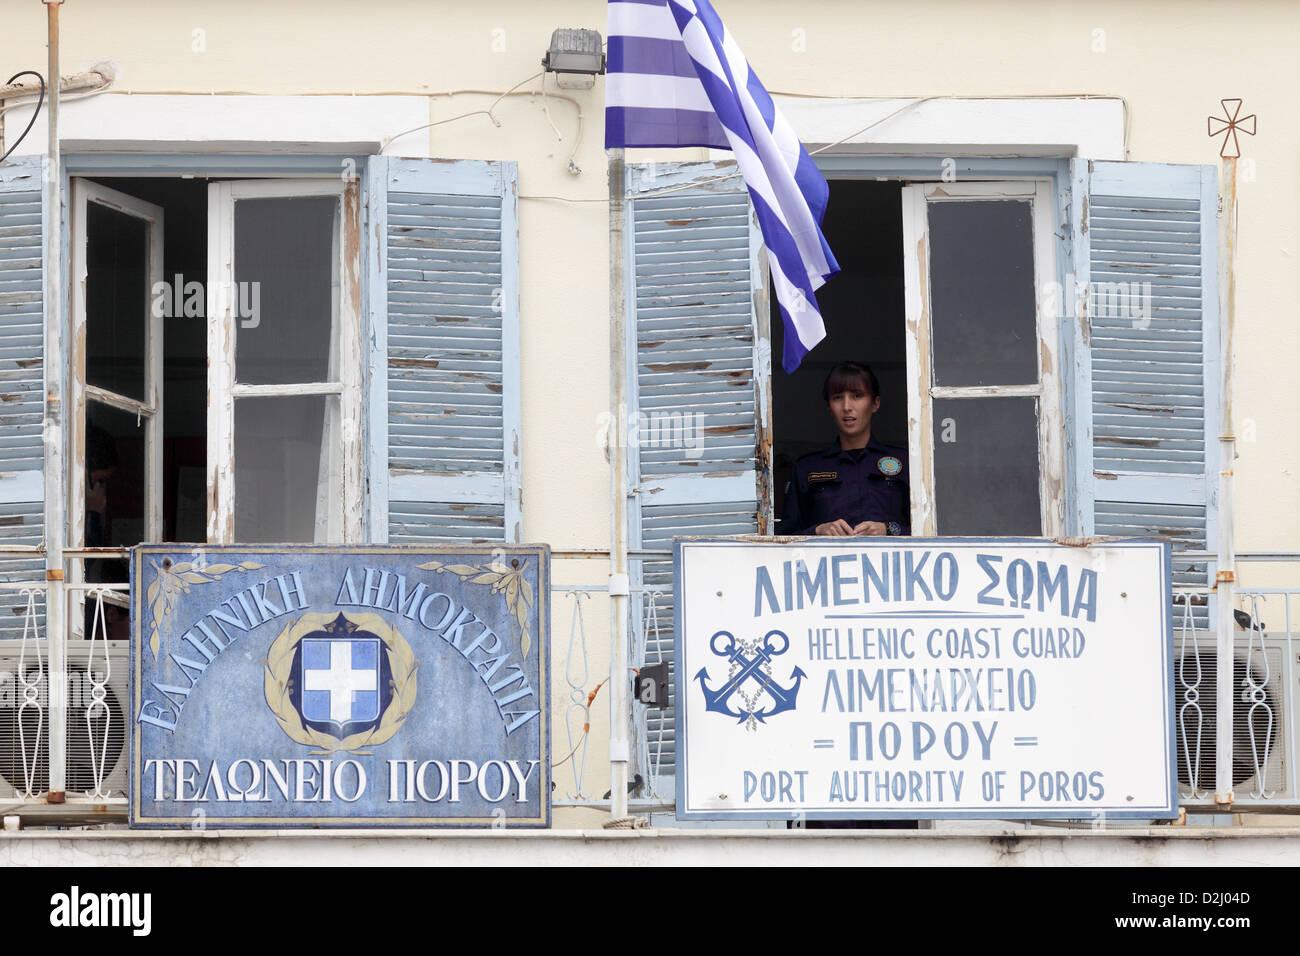 A young Coast Guard officer looks out of the window of the dilapidated coastguard office on the island of Poros, Greece Stock Photo